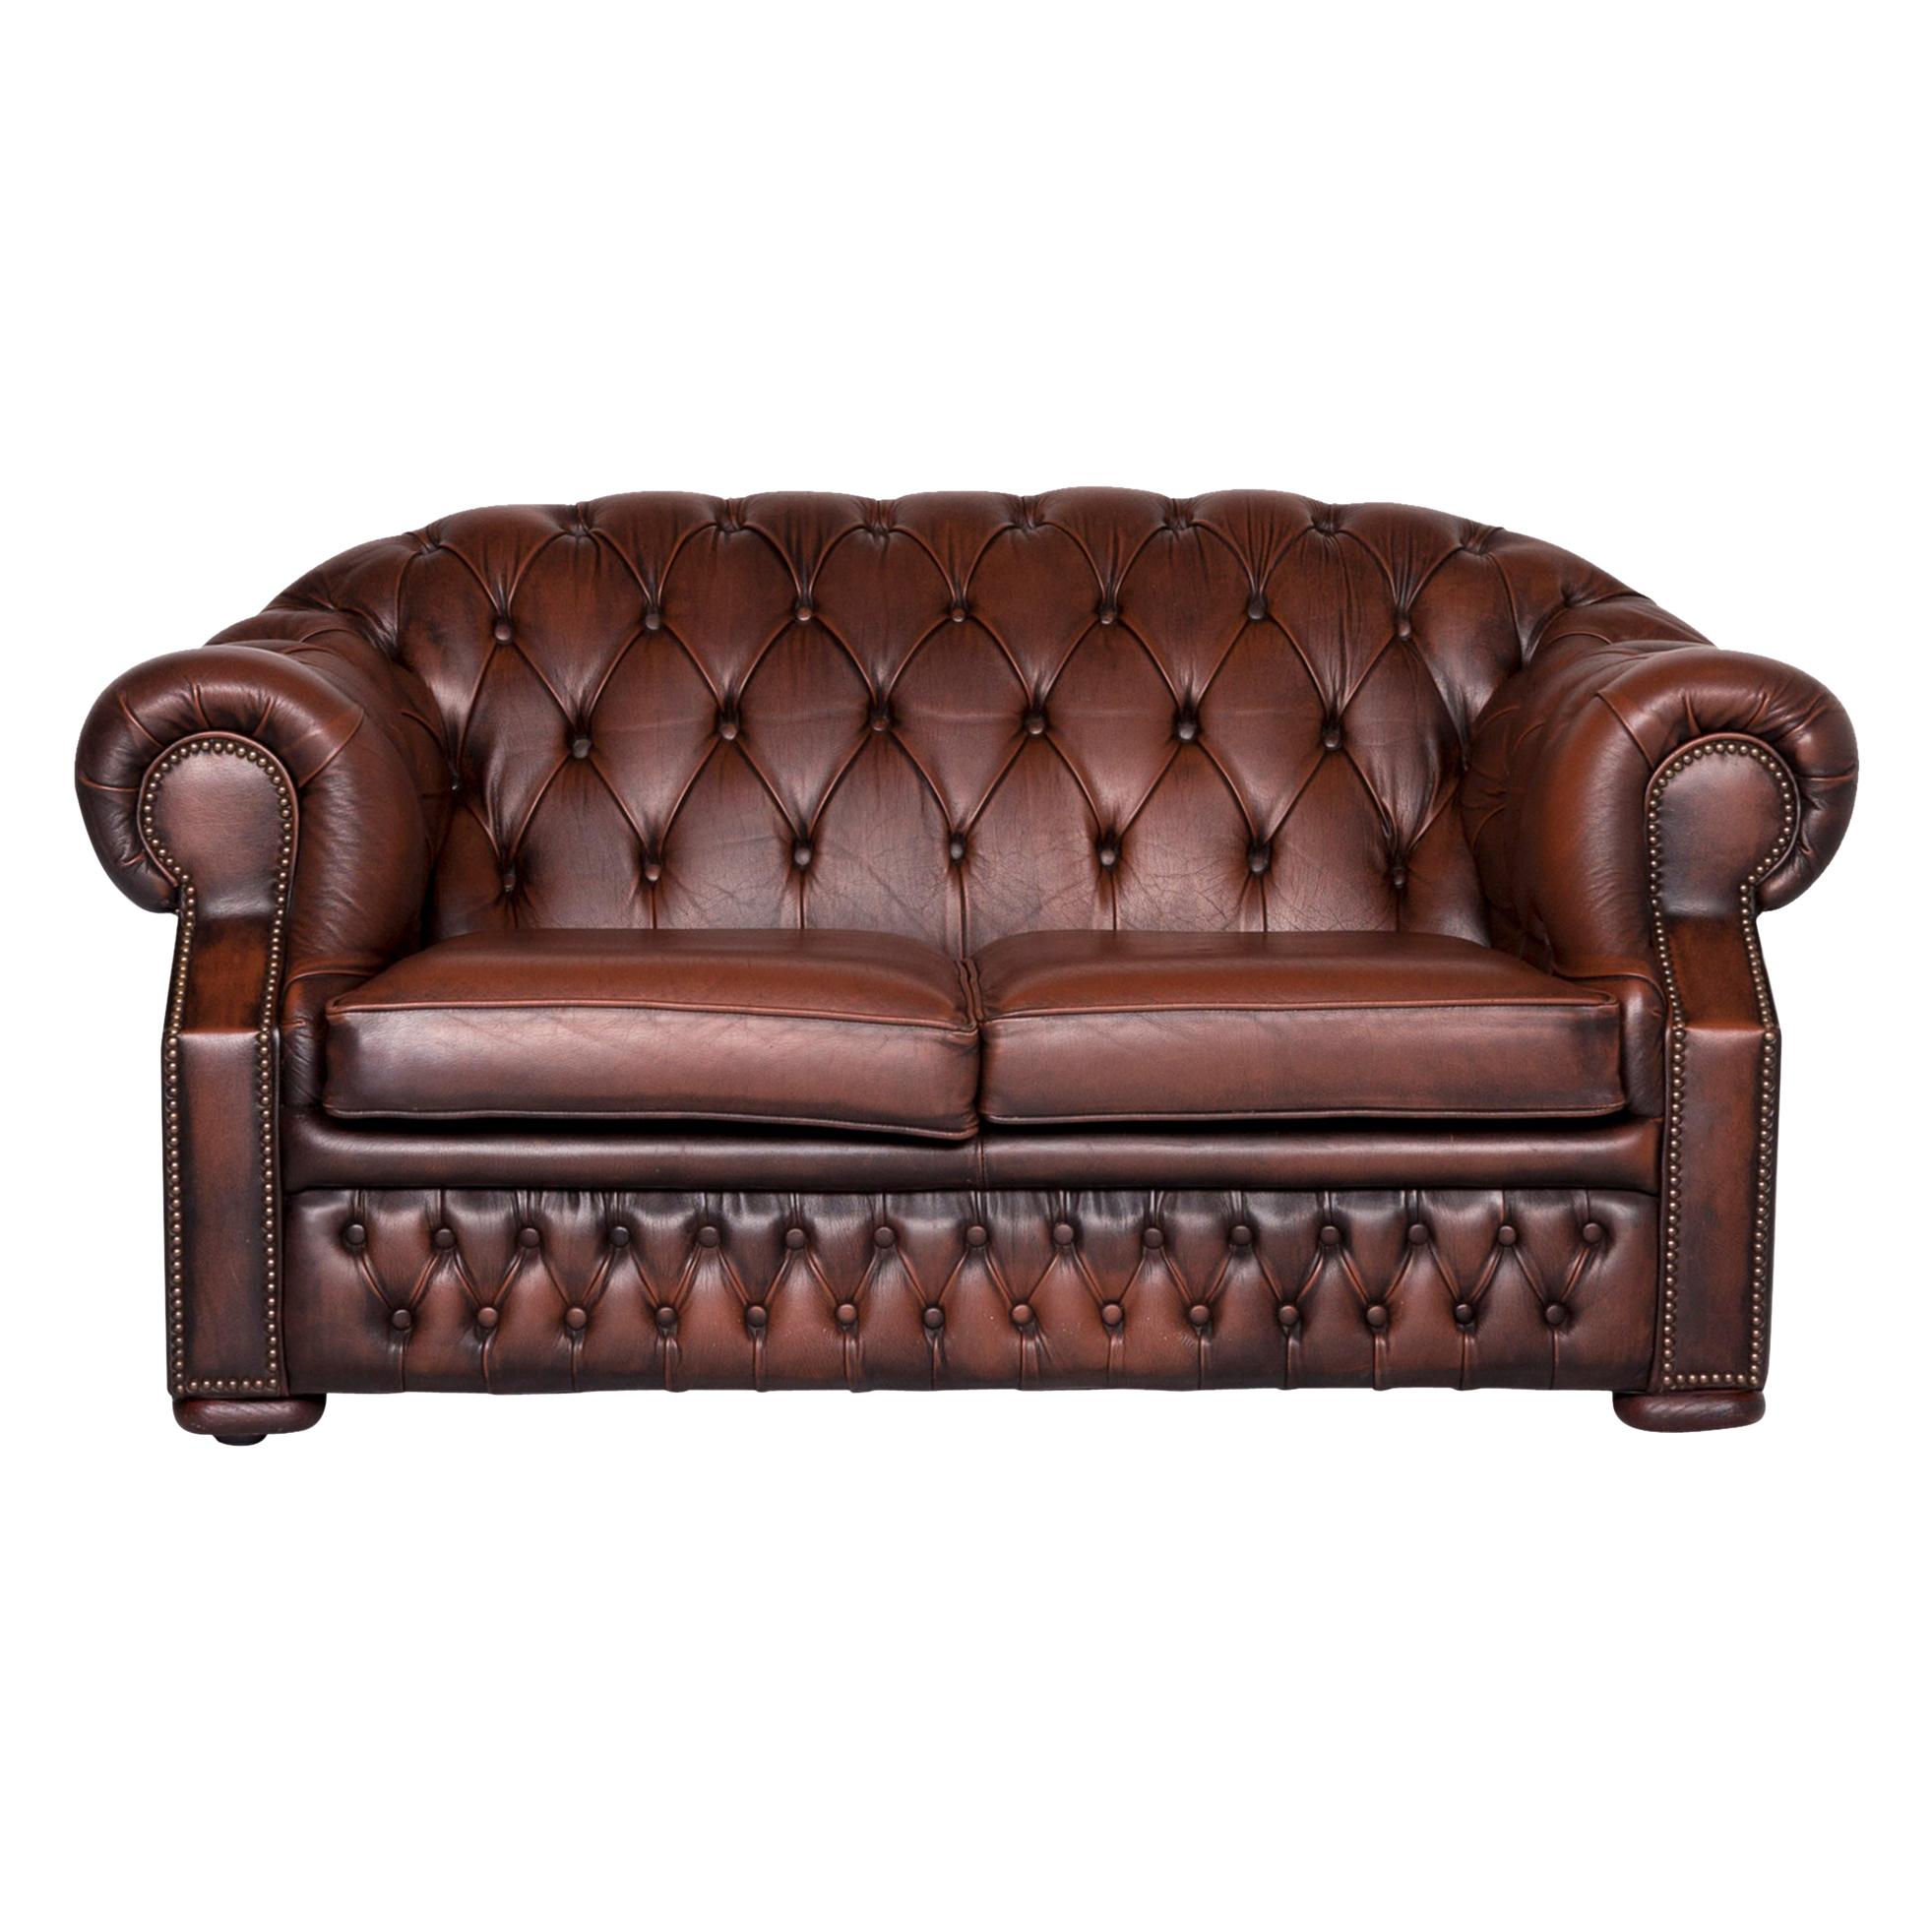 Chesterfield Centurion Designer Leather Sofa Brown Two-Seat Couch